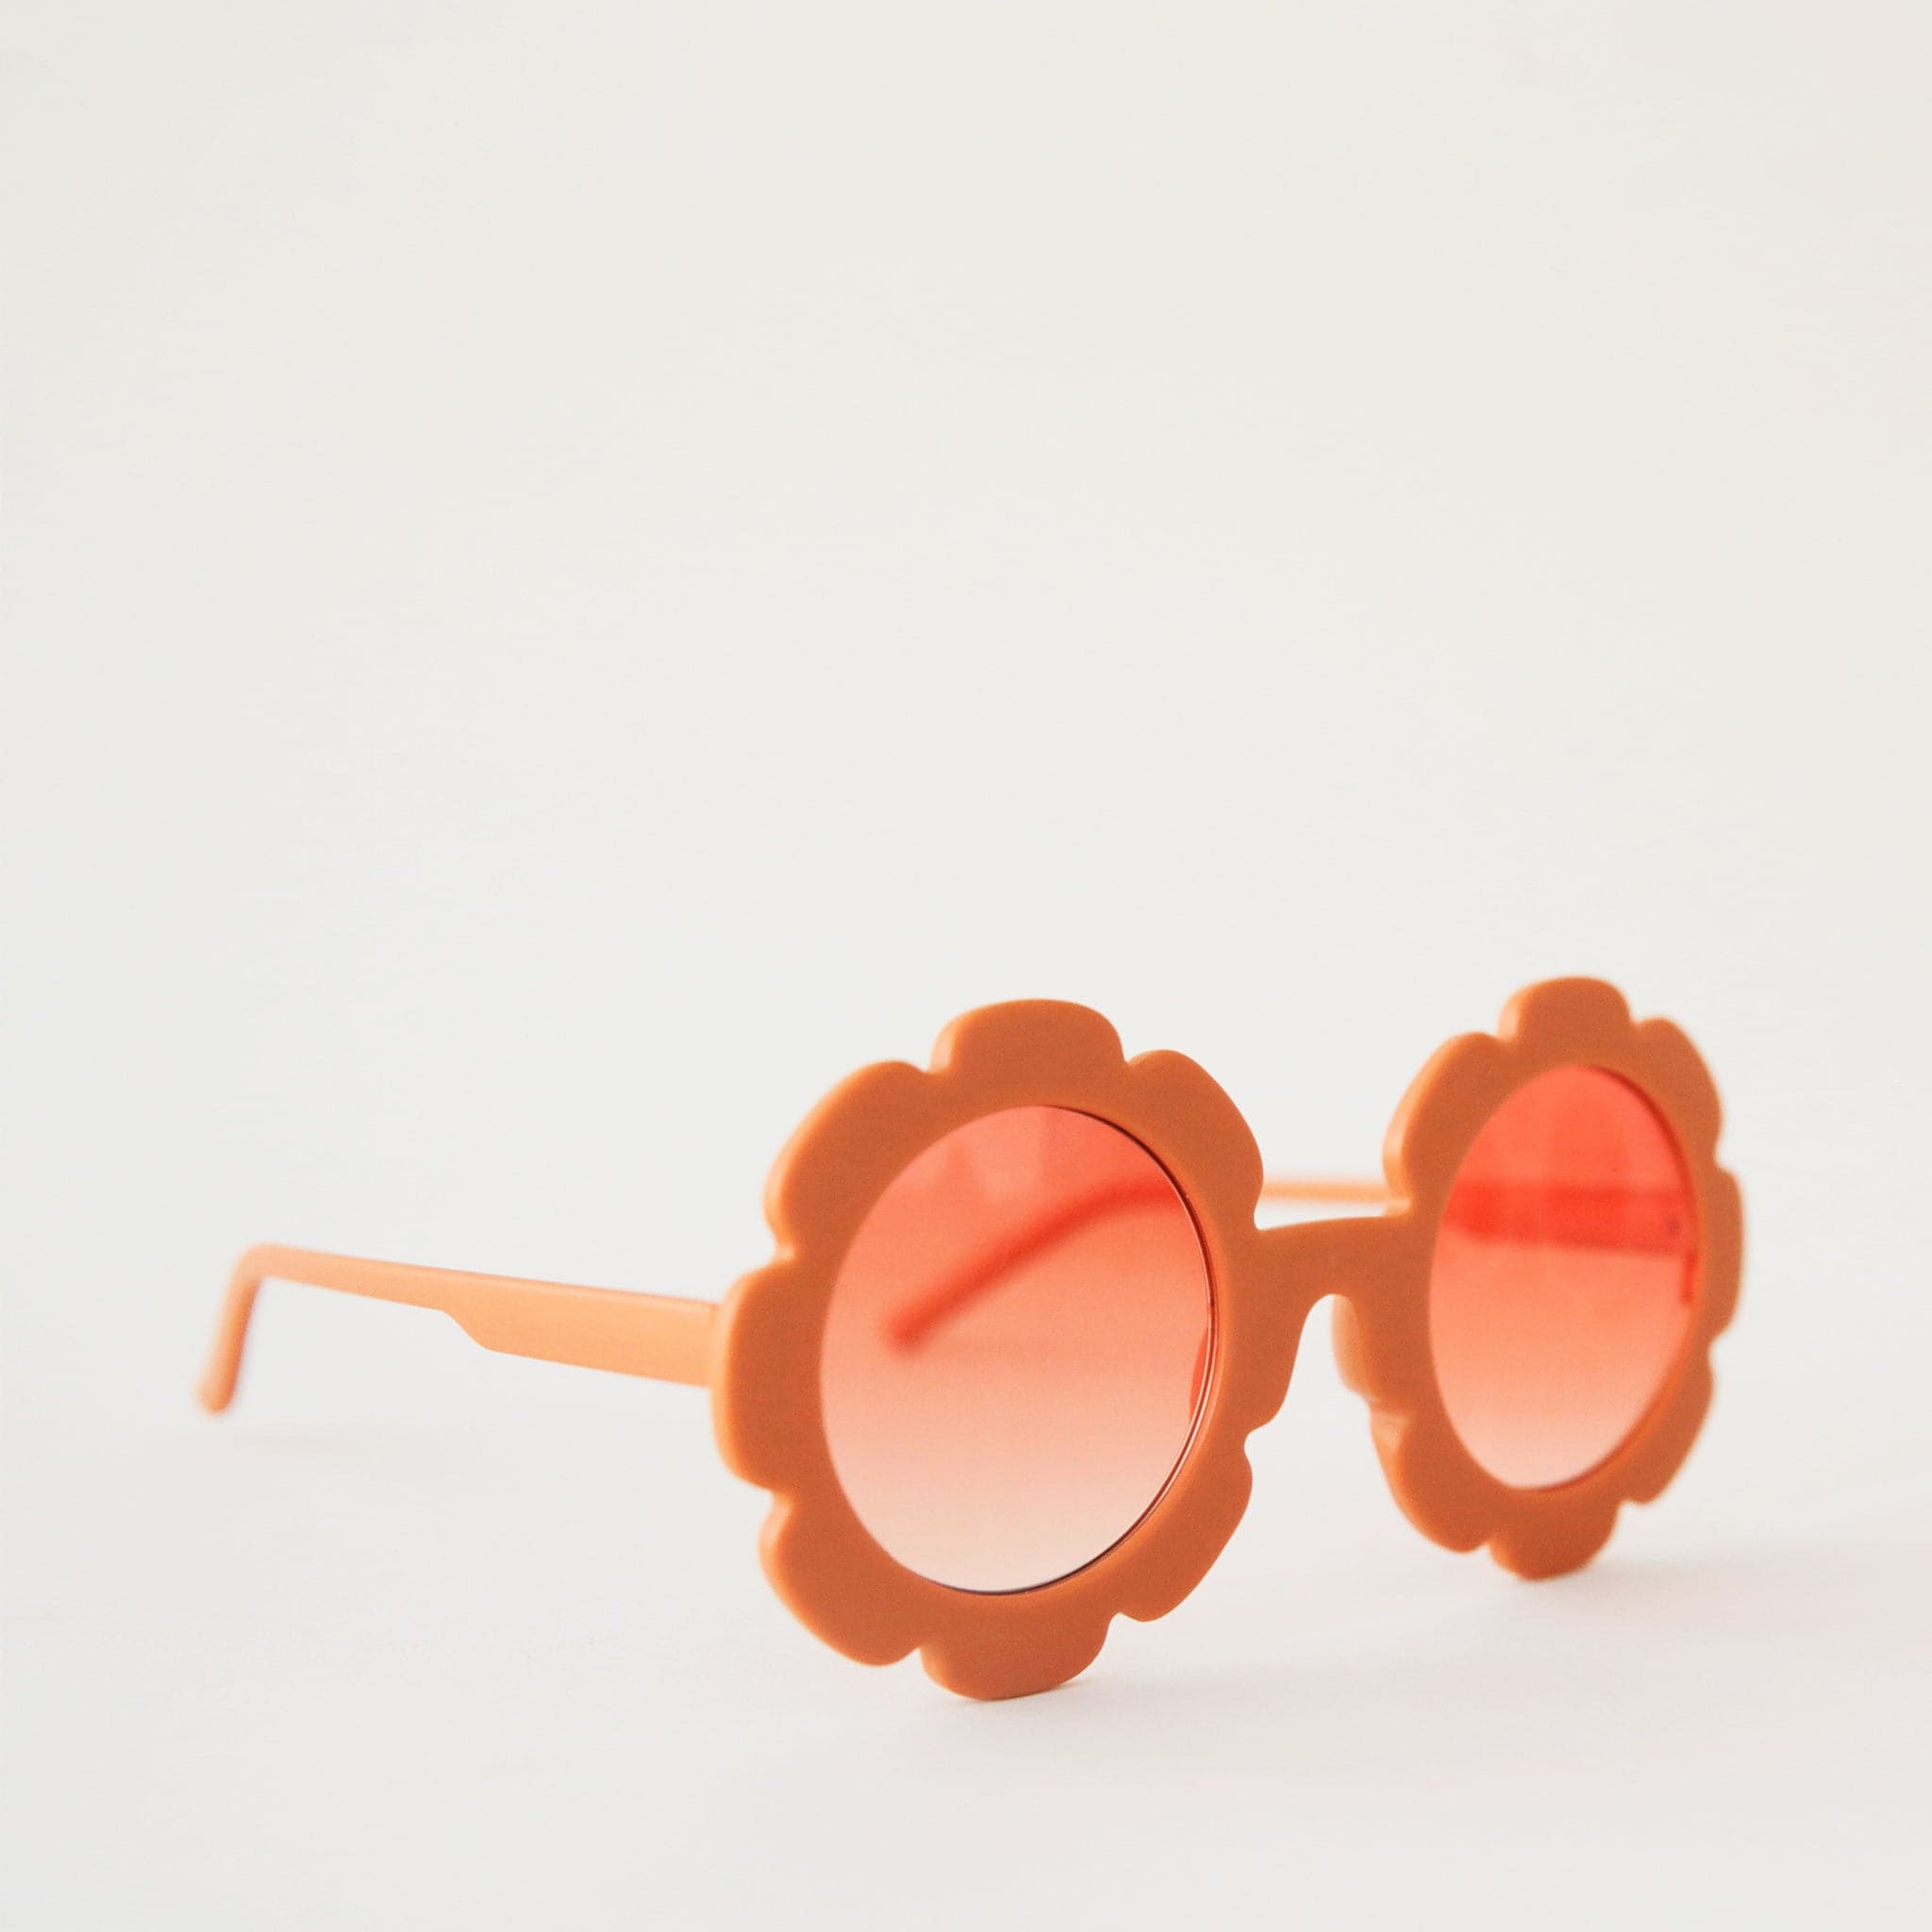 An orange flower shaped sunglass with a round orange lens in the center.